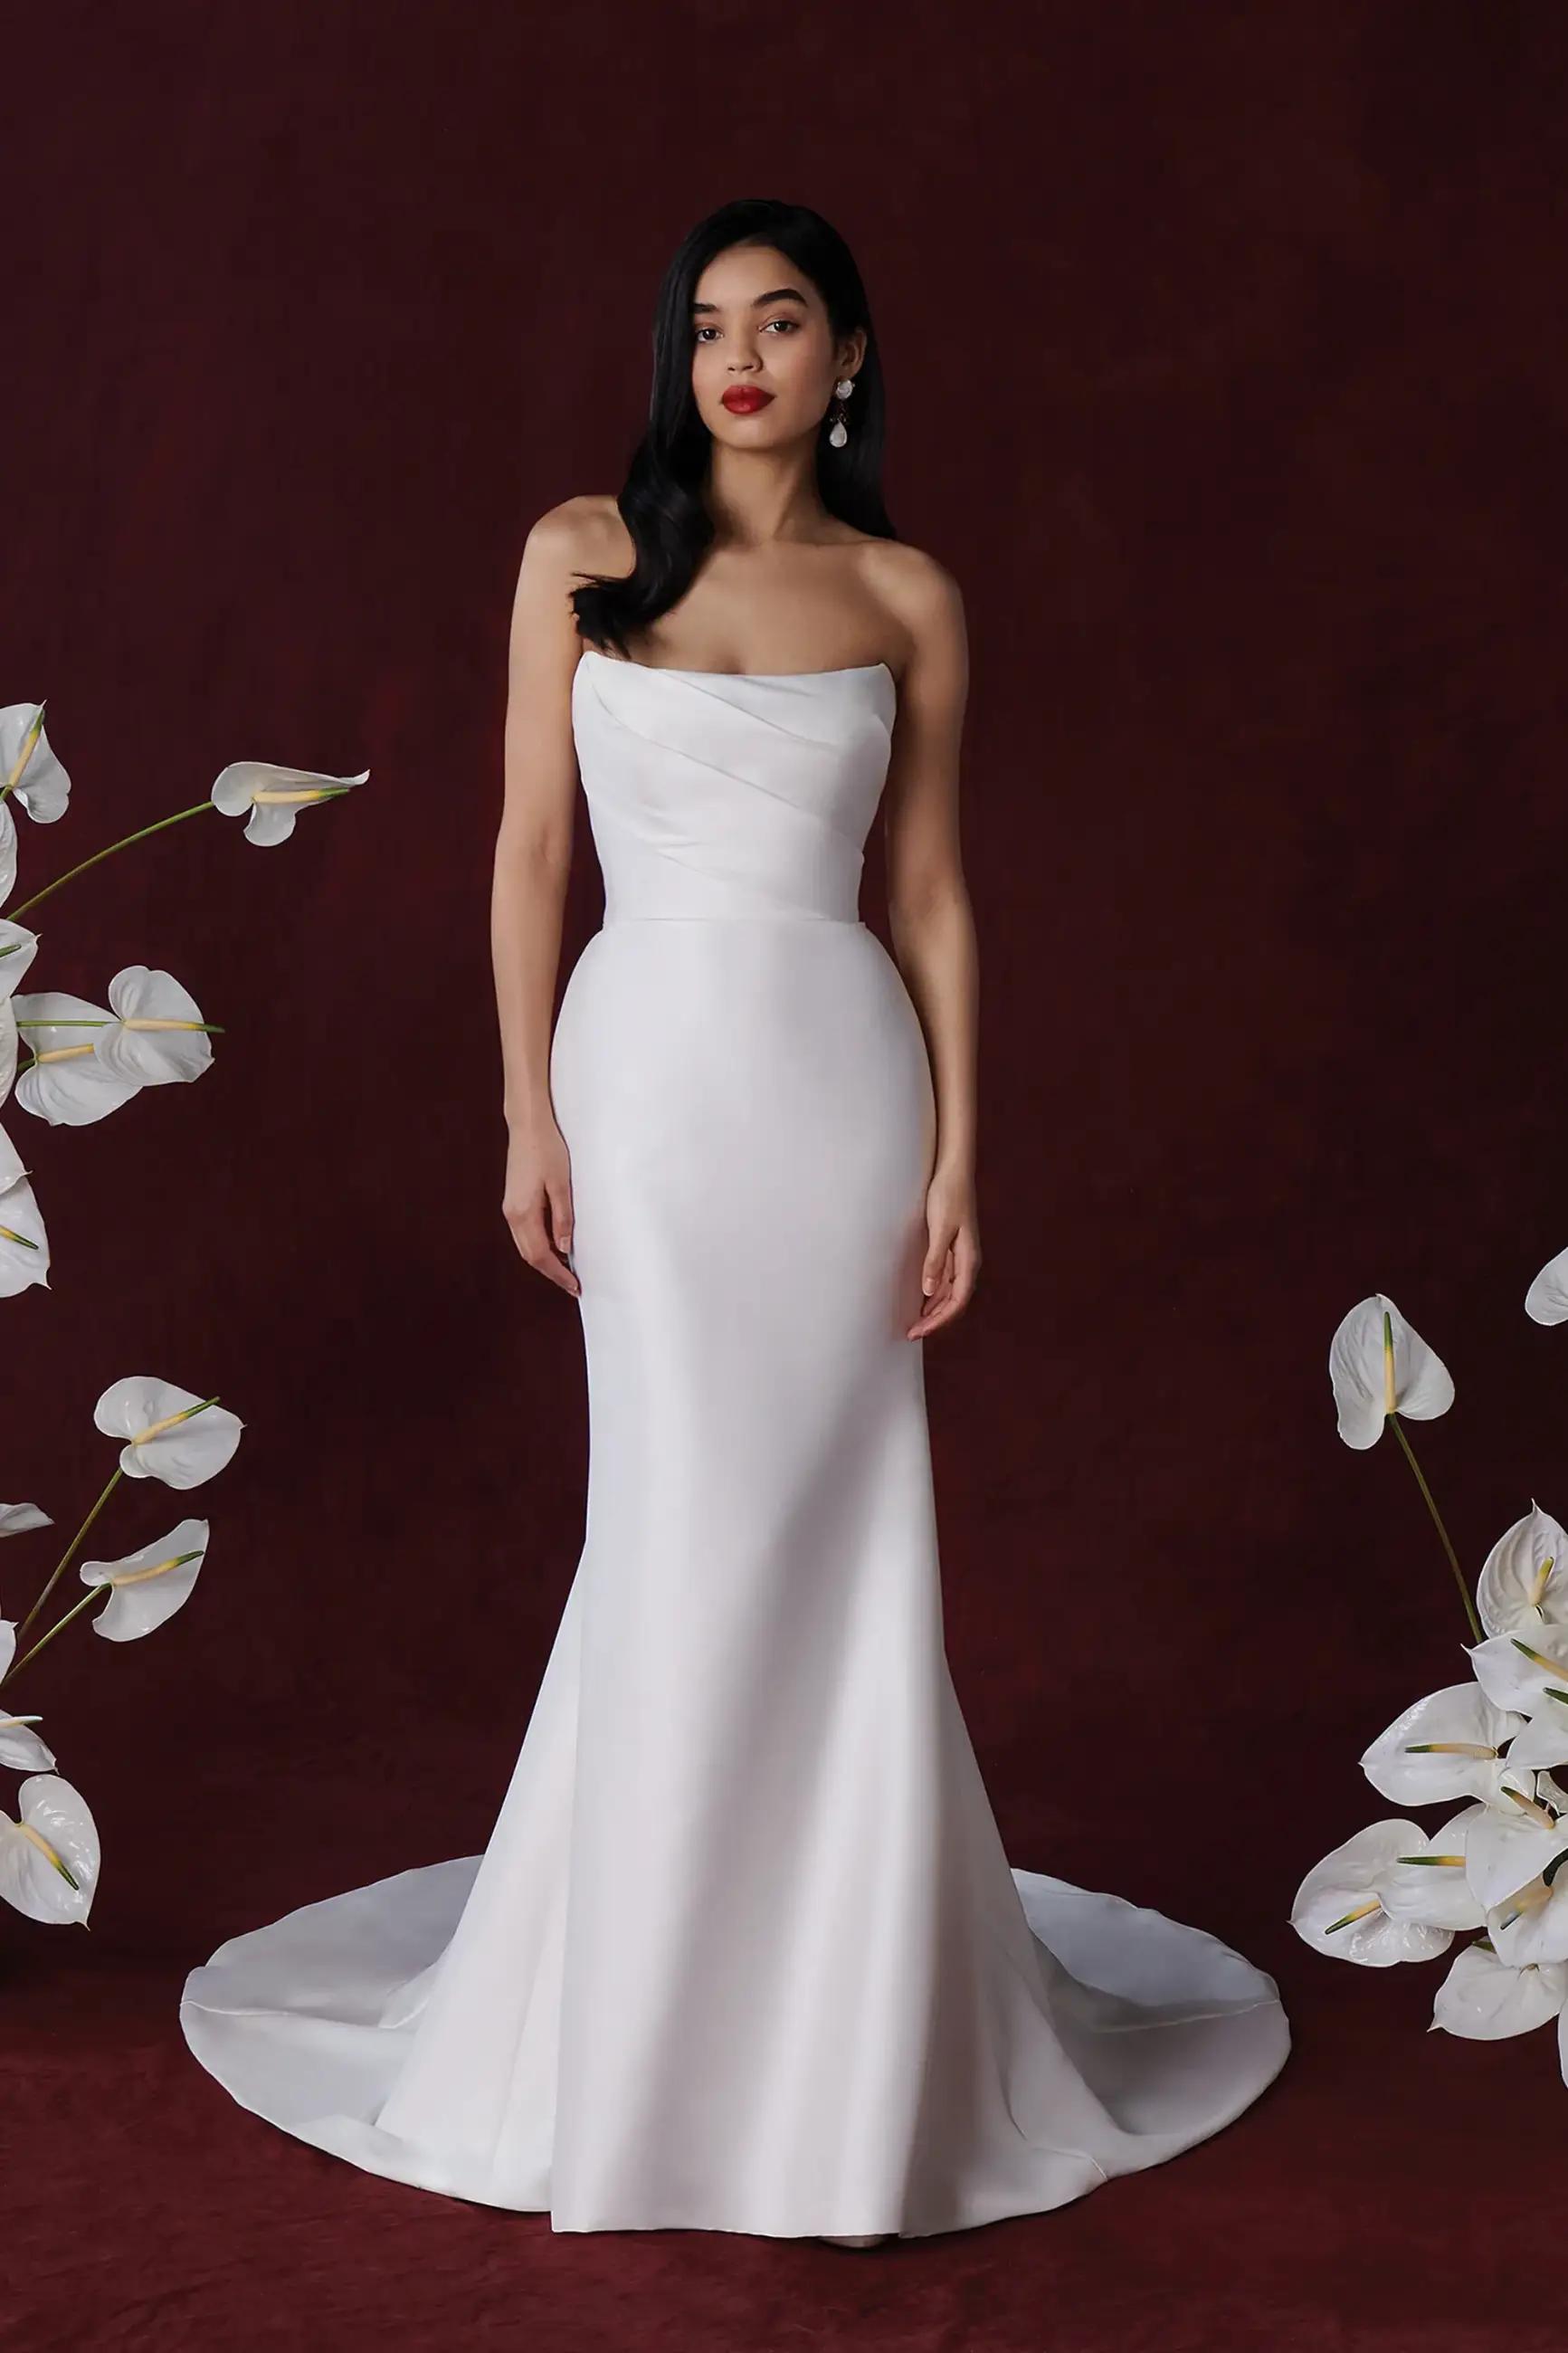 Modern and Simple Wedding Dresses Image